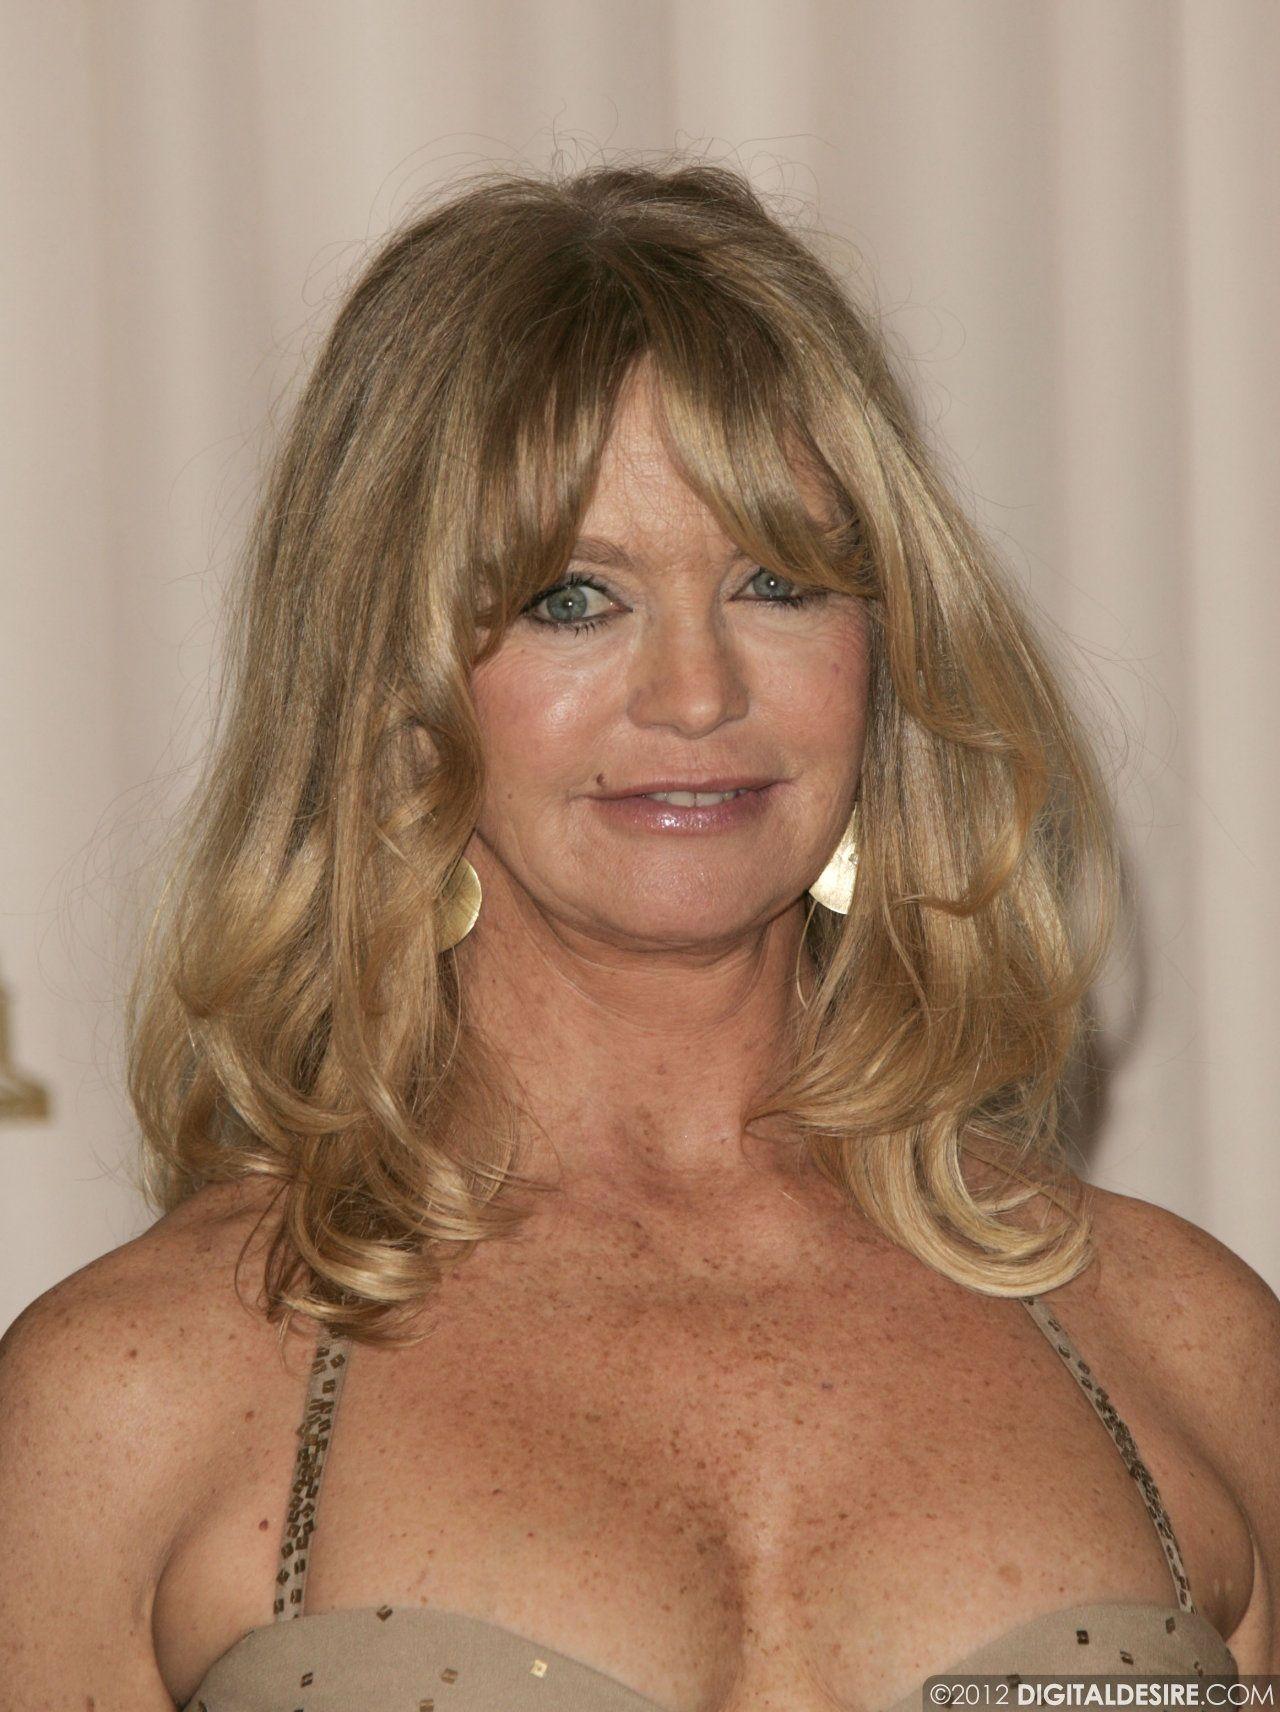 Goldie Hawn Wallpaper High Quality